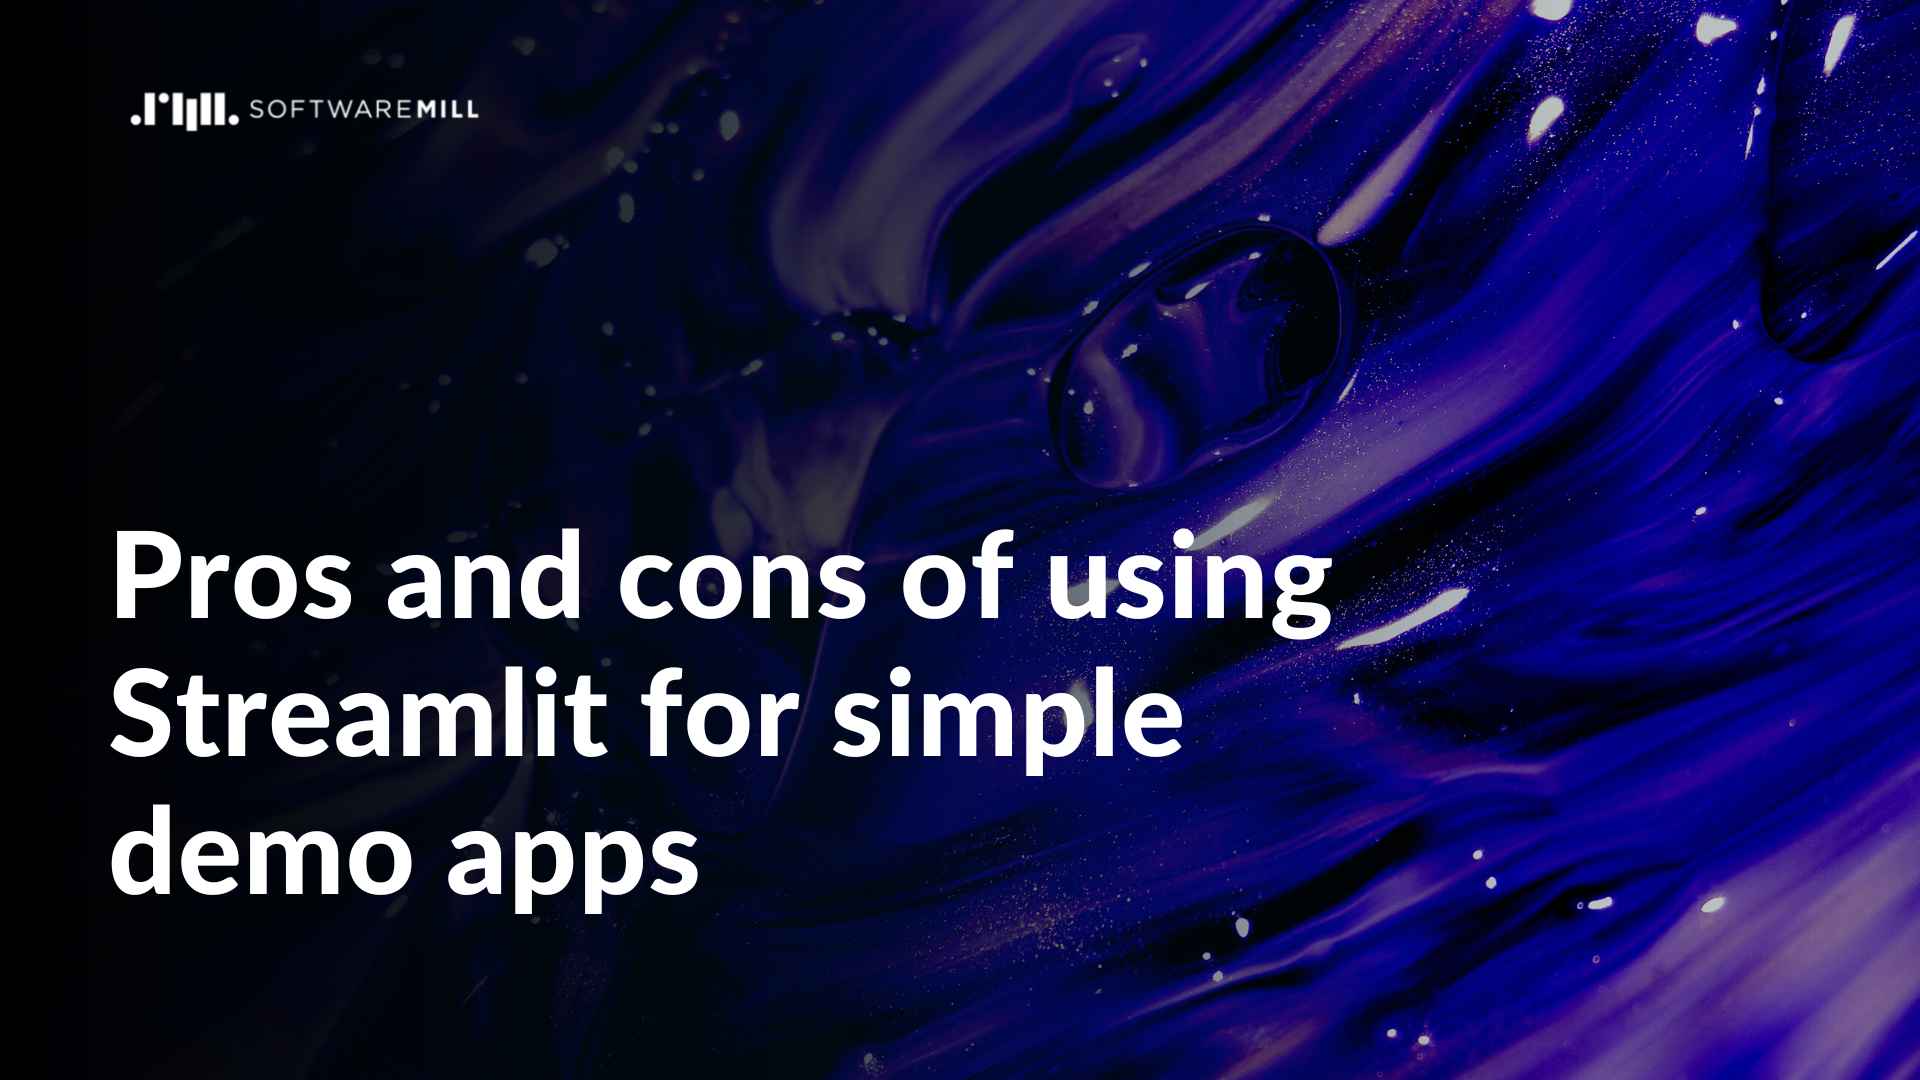 Pros and cons of using Streamlit for simple demo apps webp image